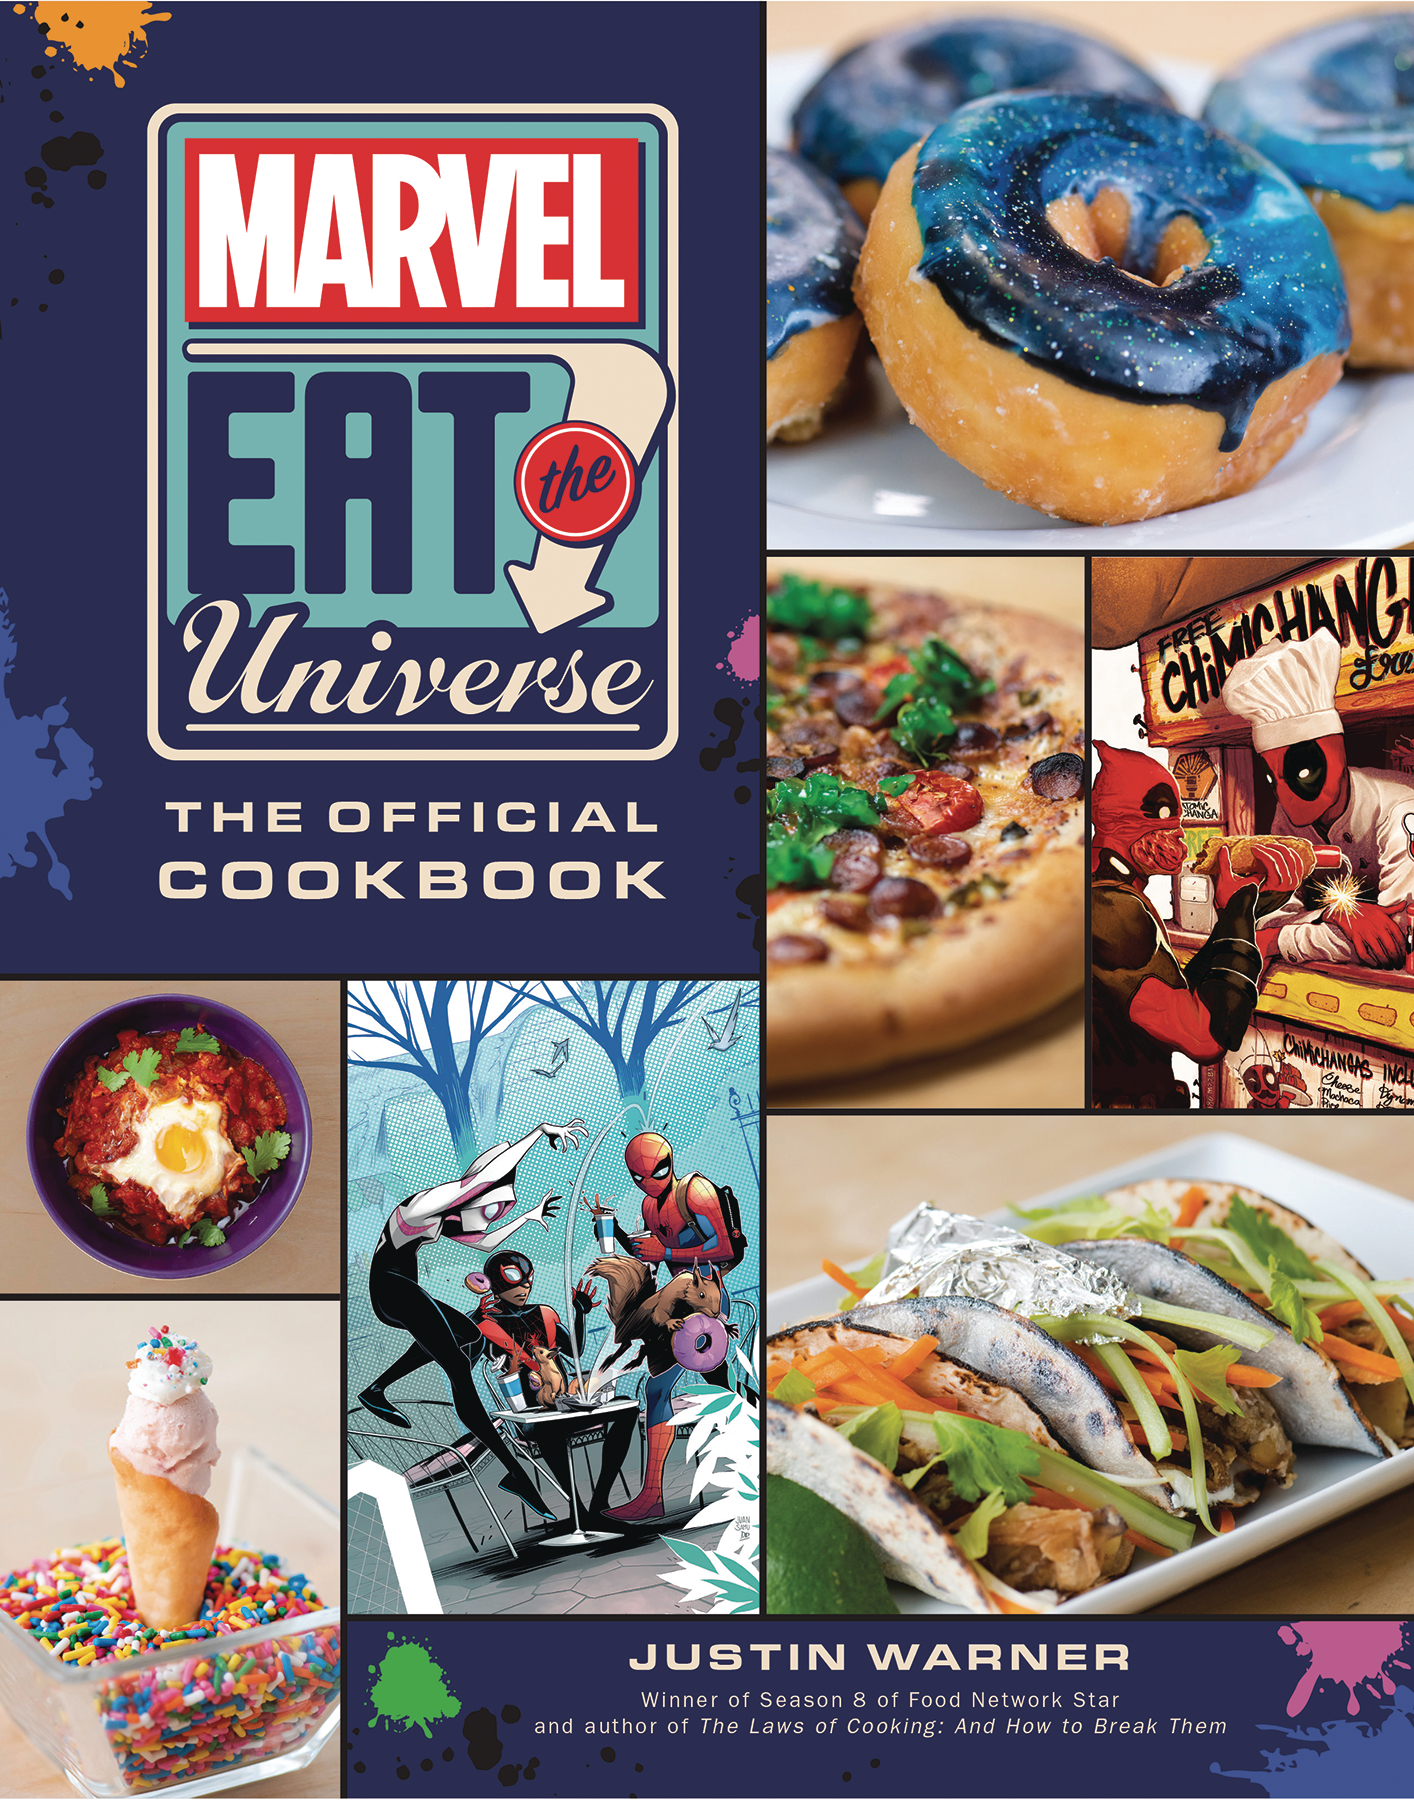 Marvel Eat The Universe Official Cookbook Hardcover